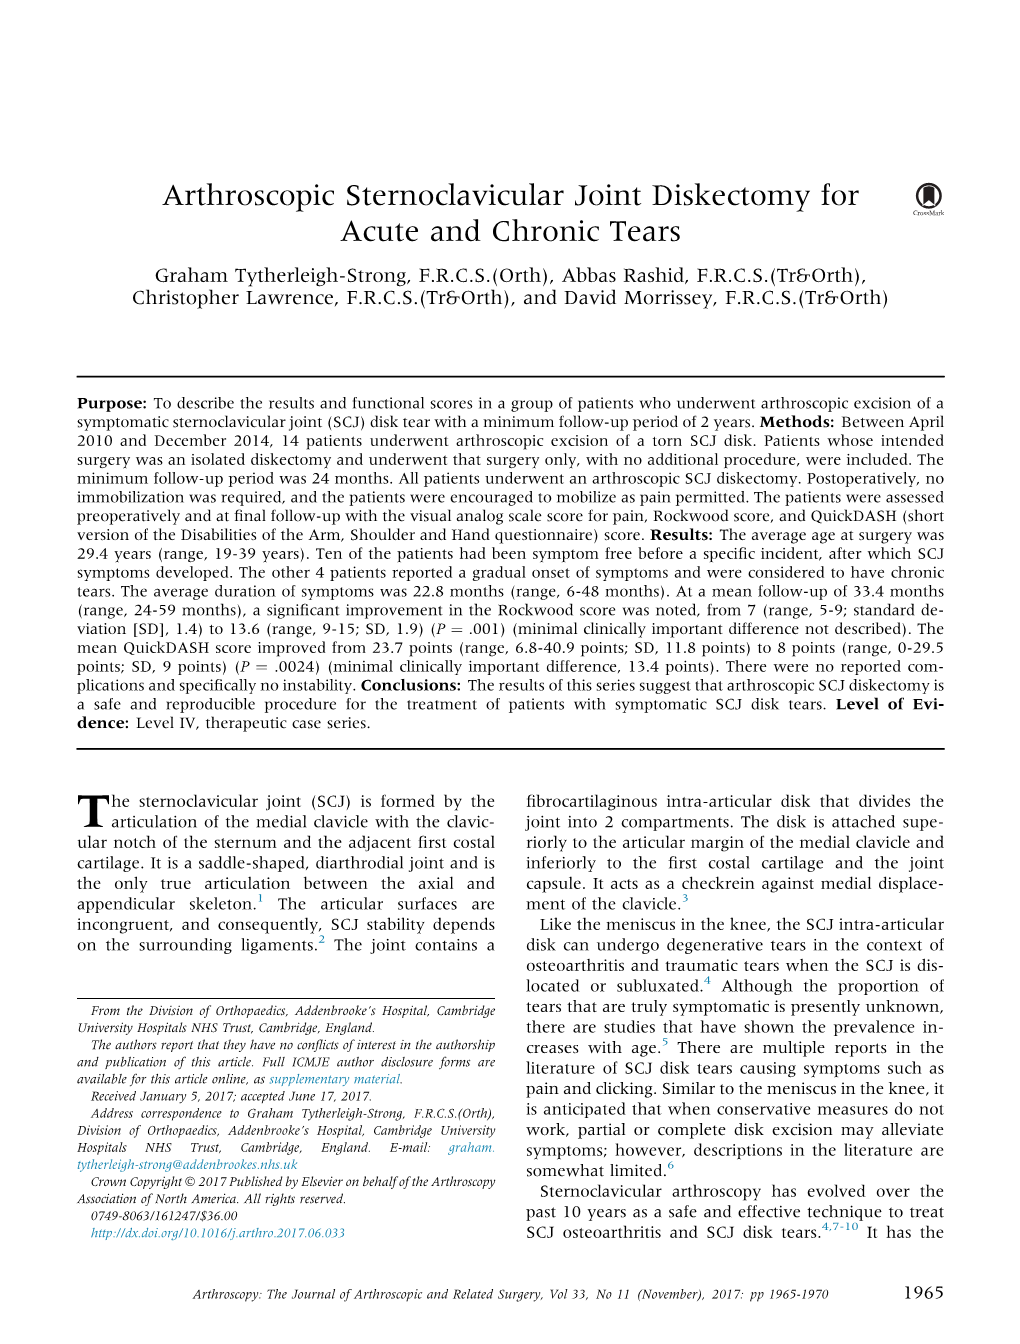 Arthroscopic Sternoclavicular Joint Diskectomy for Acute and Chronic